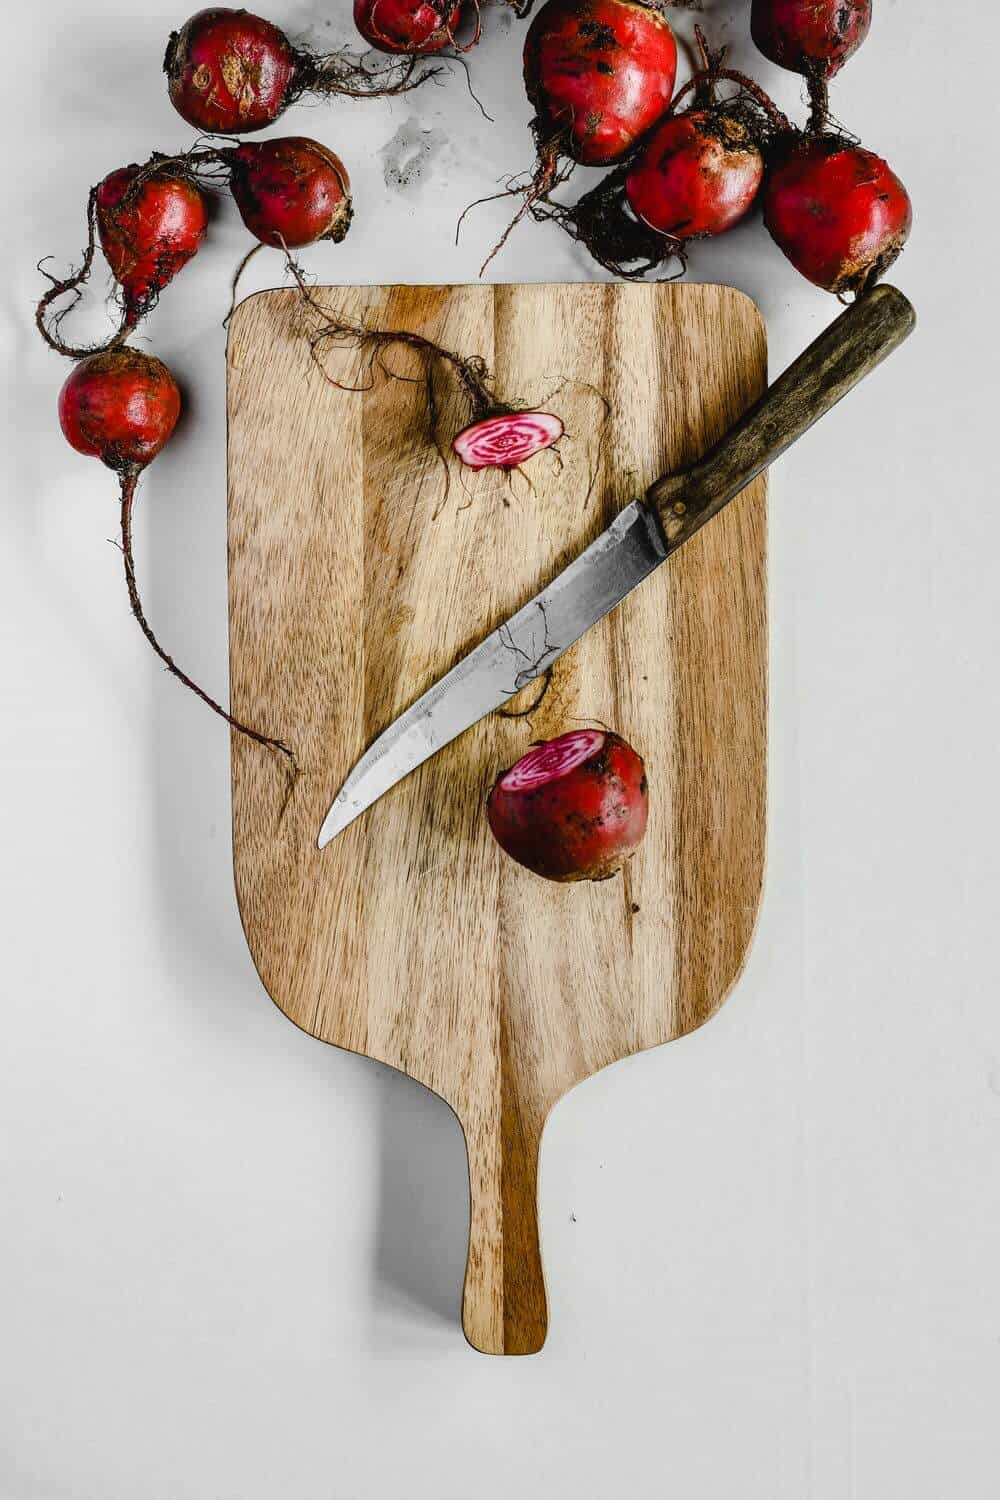 Beets on a wooden cutting board with a knife